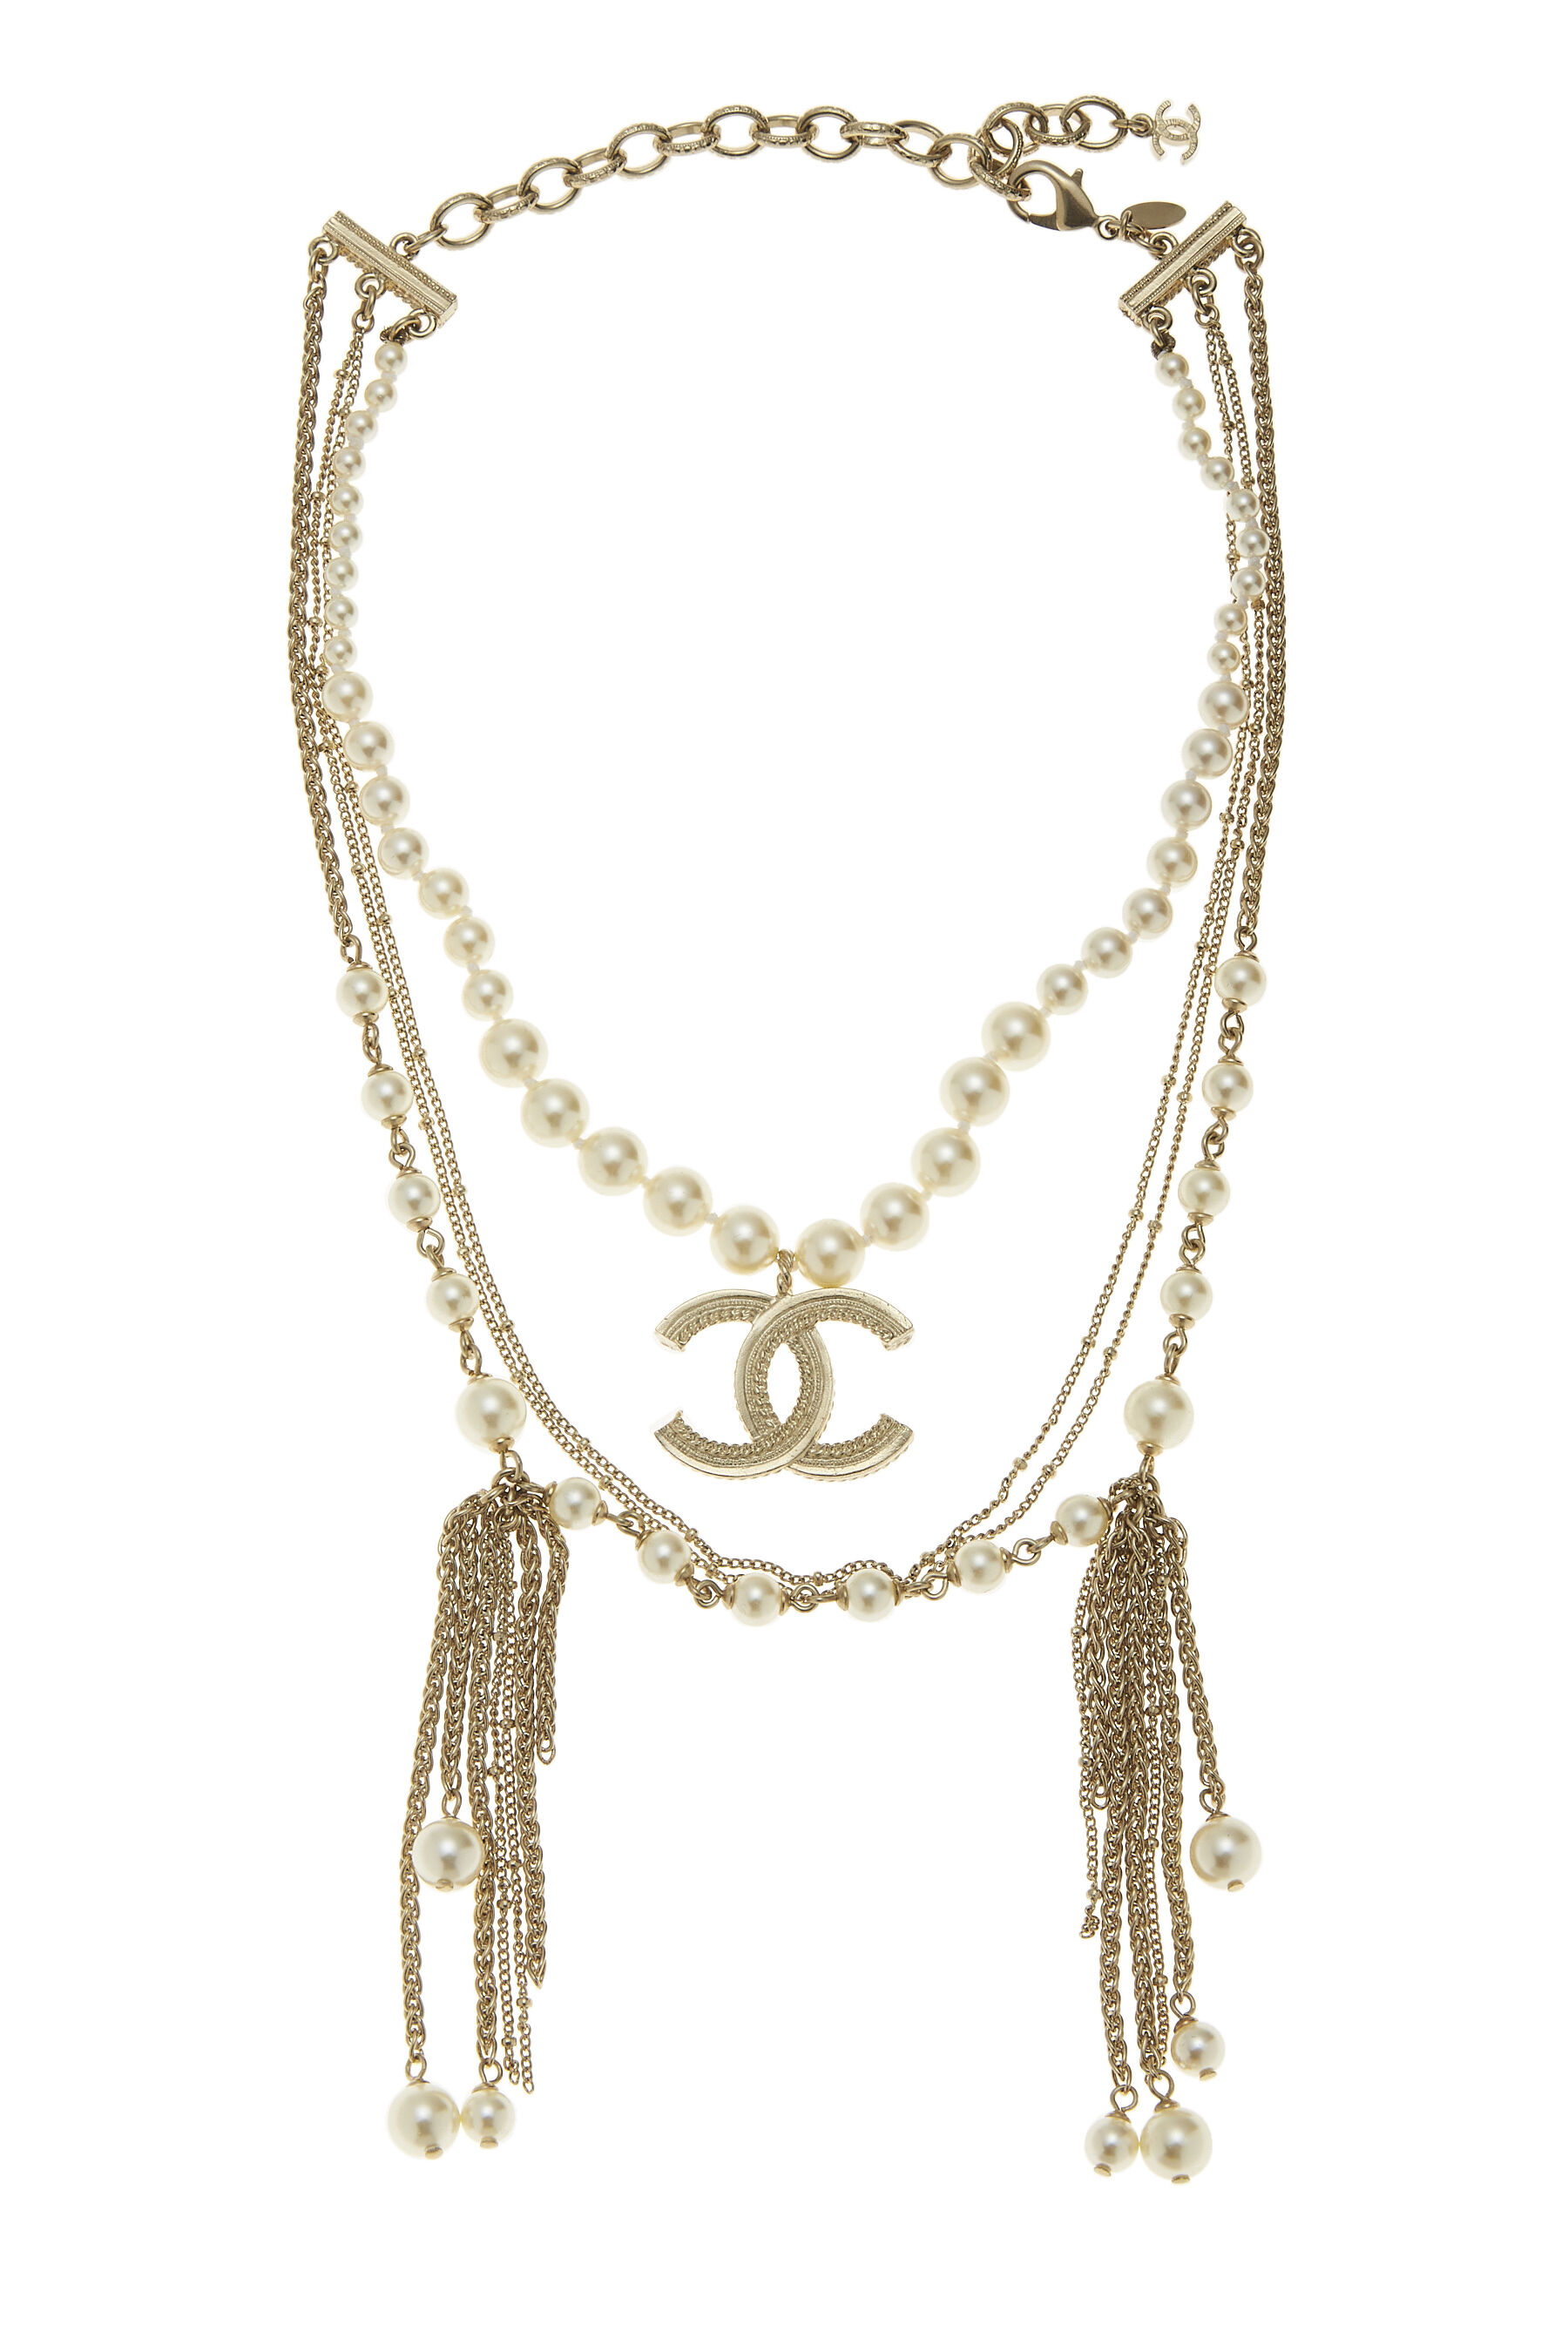 Chanel Faux Pearl & Gold Layered Chain 'CC' Necklace